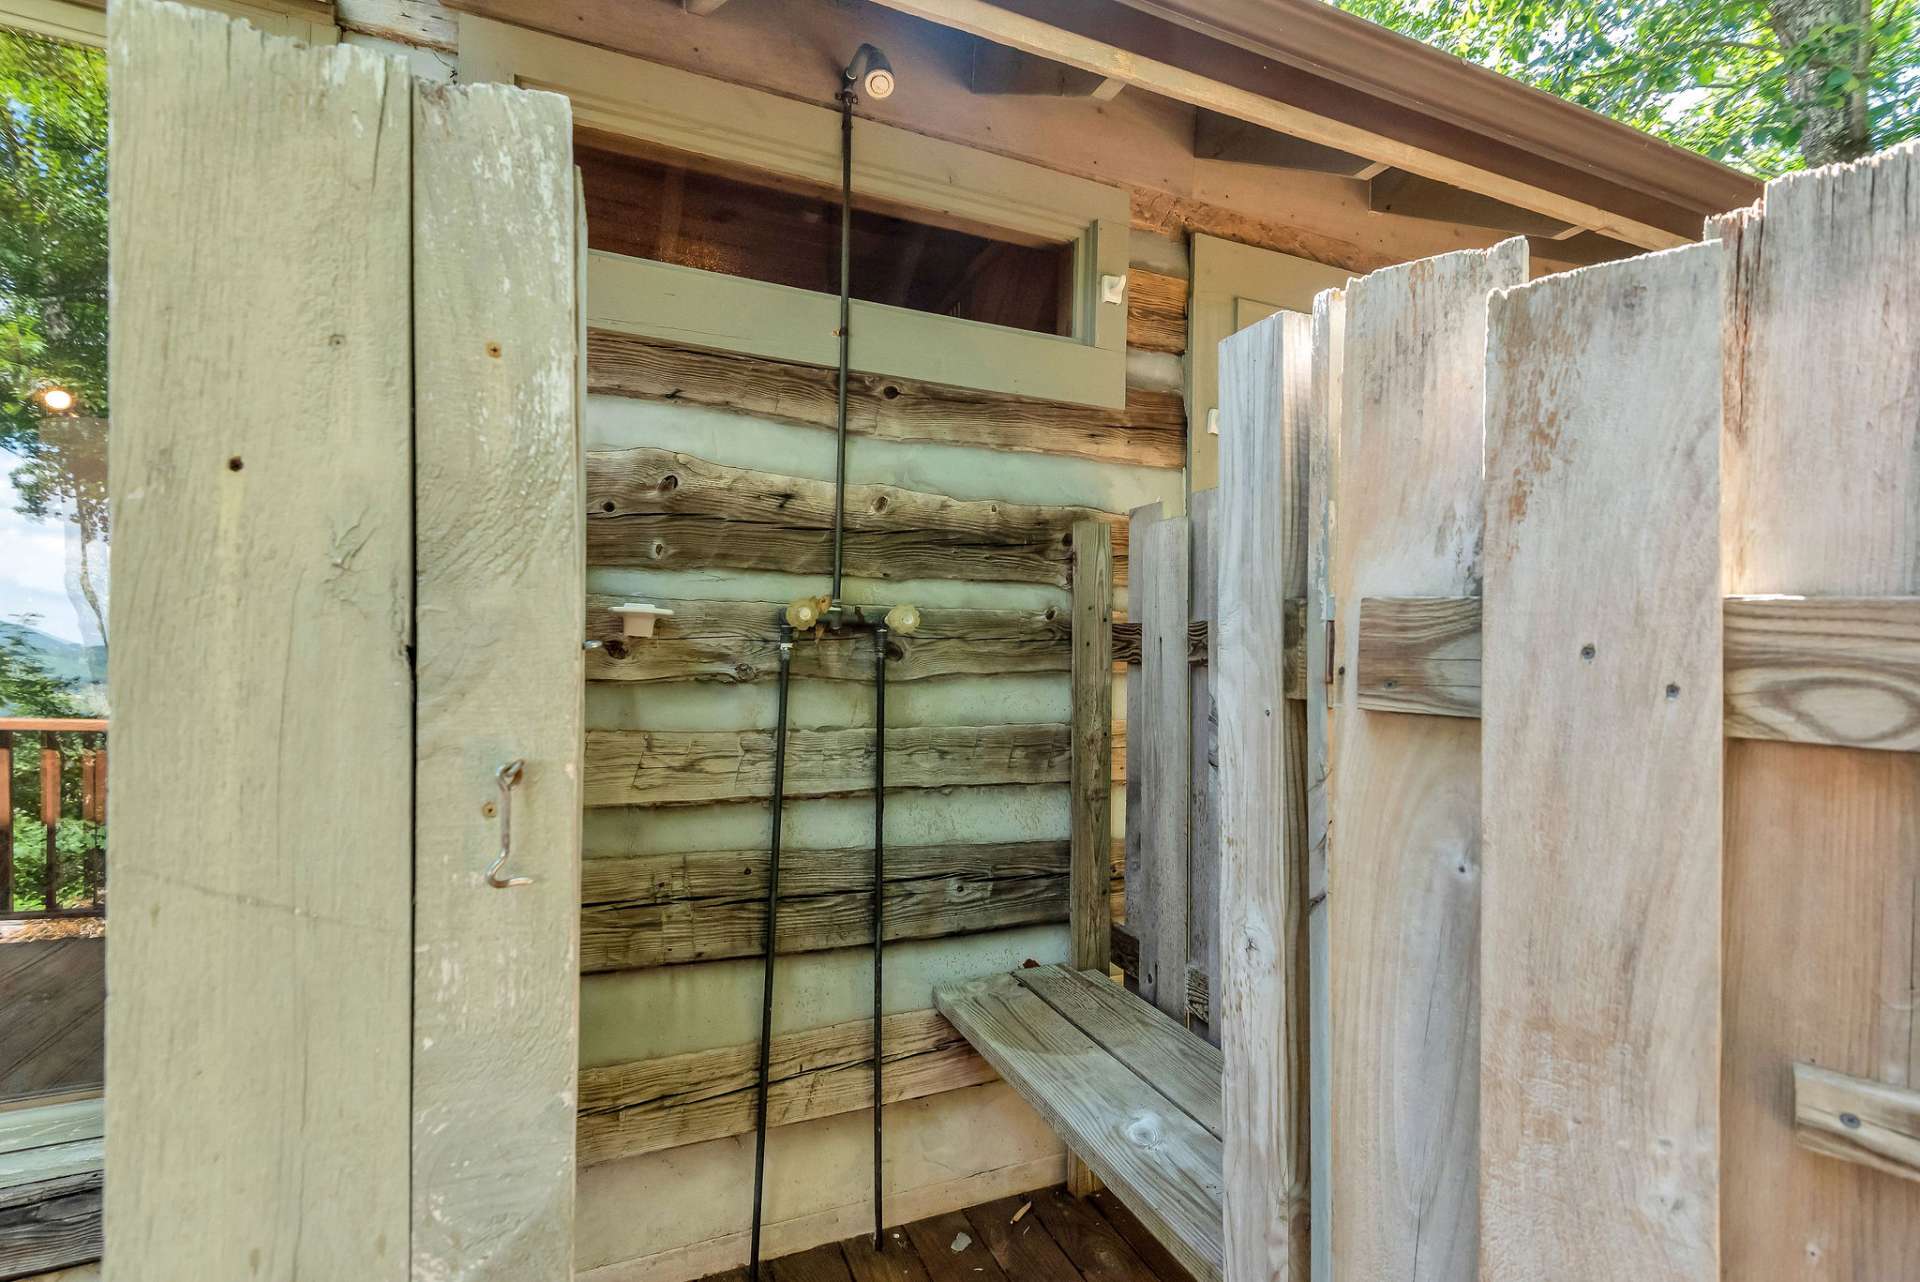 After a day of hiking the mountain trails, cool off in the outdoor shower!